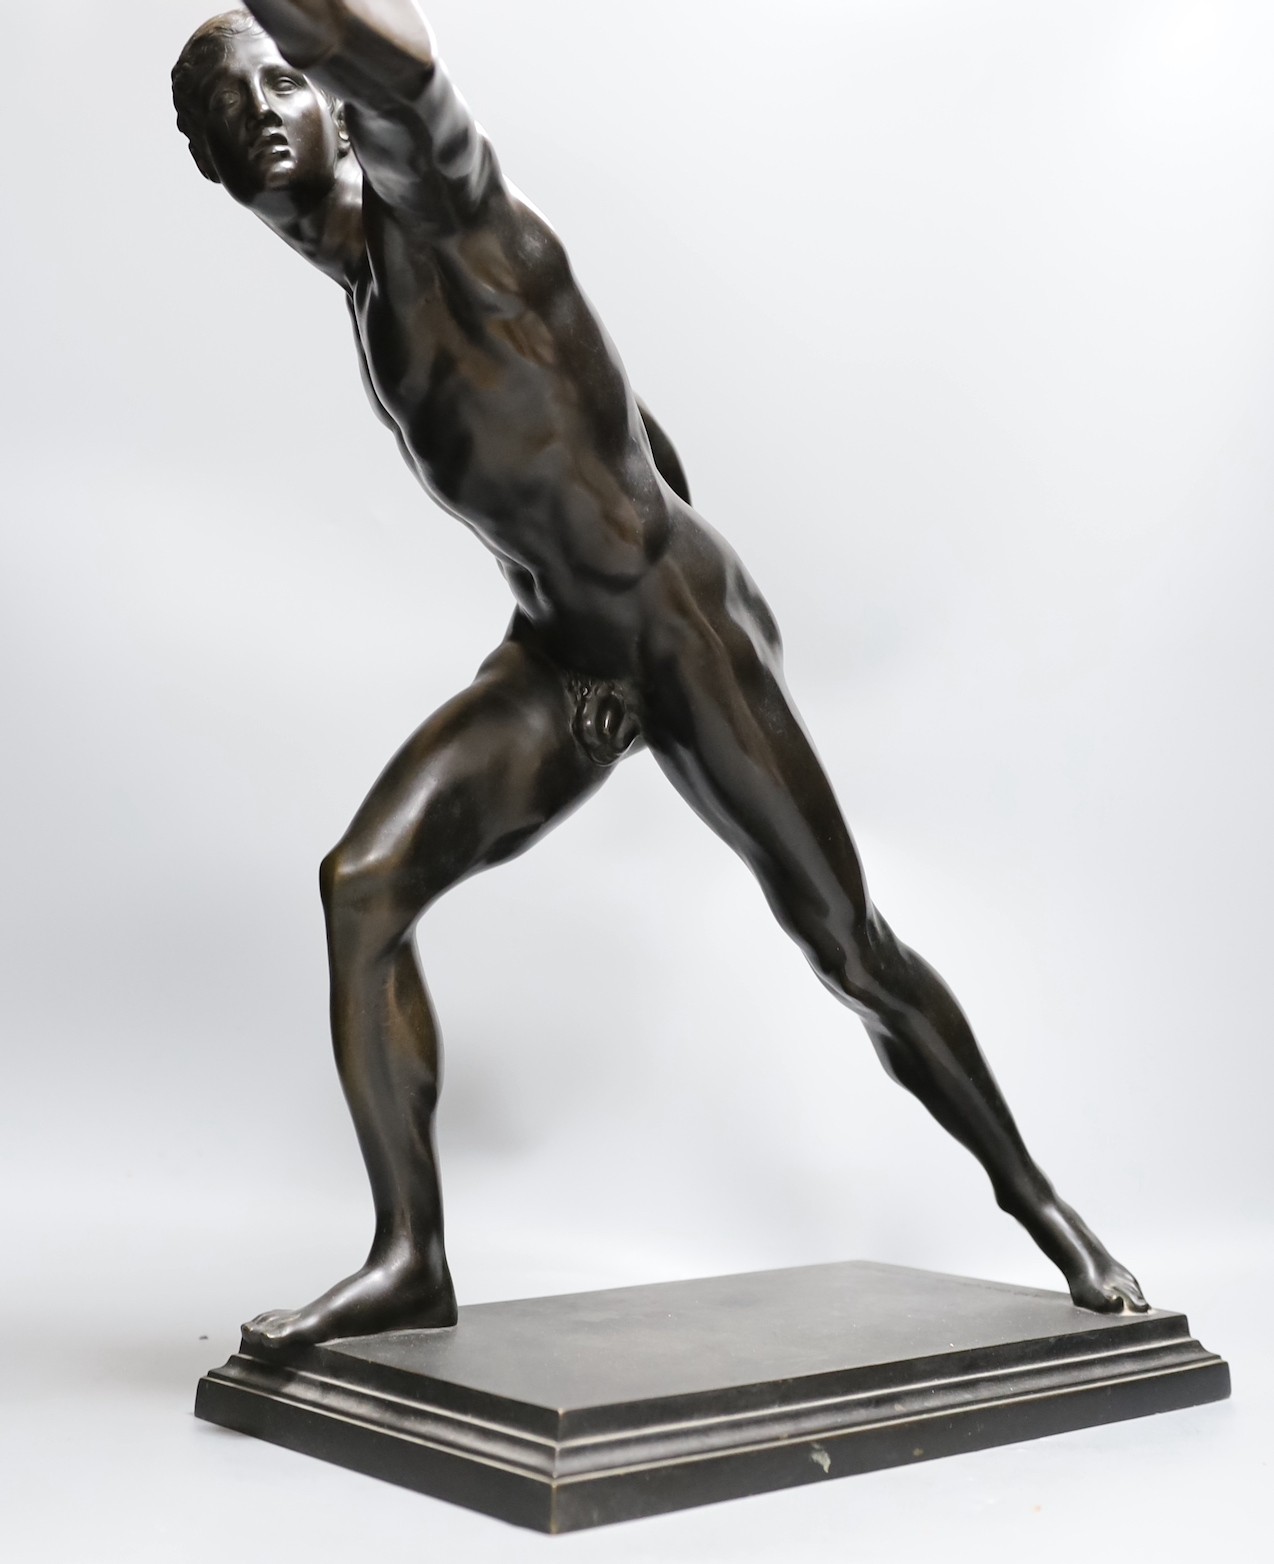 After the antique, a large bronze figure of a gladiator, foundry mark of Gladenbeck, Berlin, 49cm tall